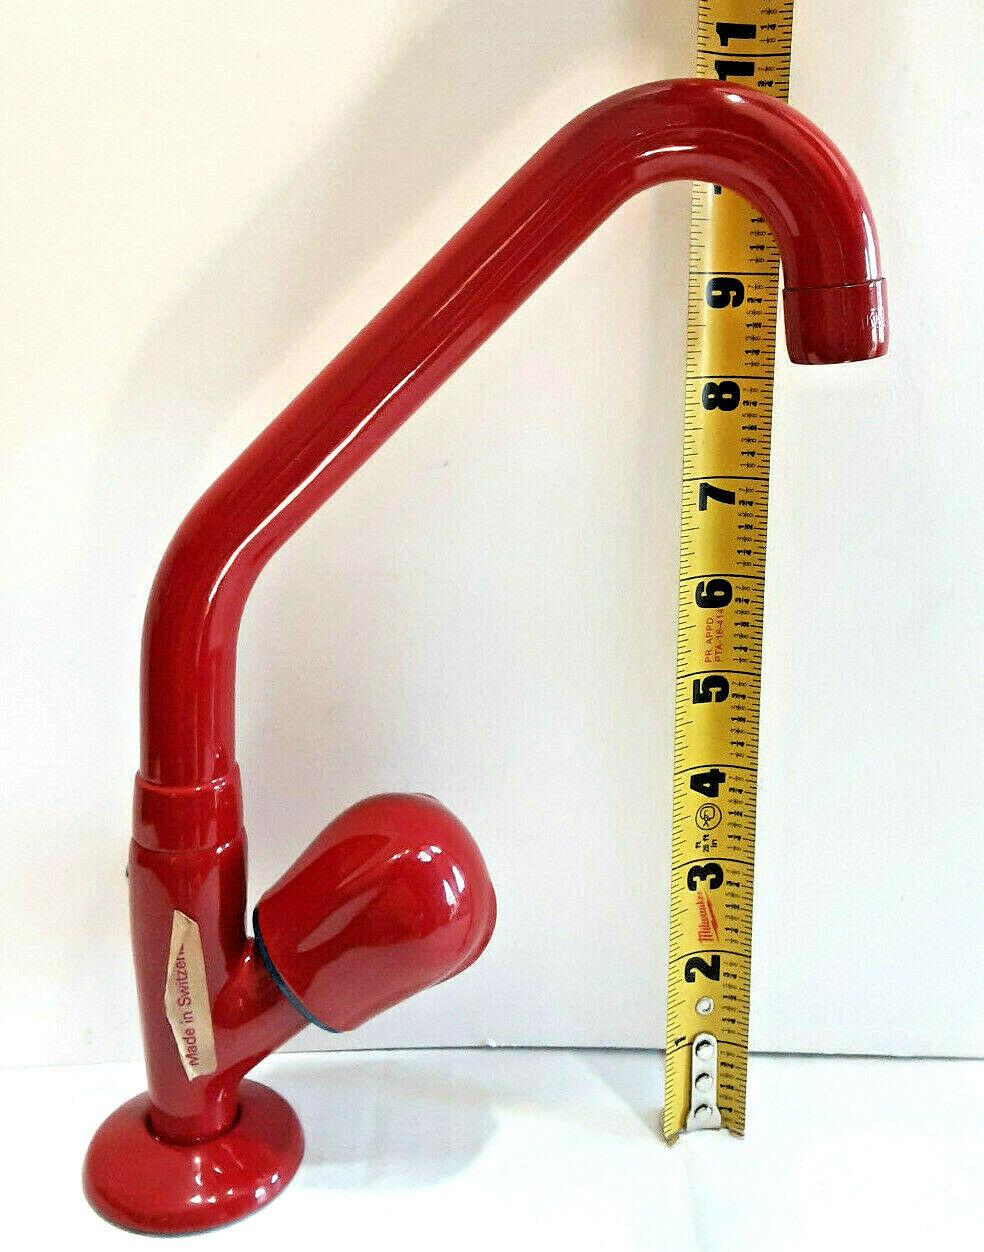 Custom vintage lipstick red curved tap faucet by KWC Switzerland, single-handle. Rare, custom piece from the iconic Swiss manufacturer. Gorgeous red powder coat. Single spherical handle. Includes hardware pictured. Never installed. Display piece.